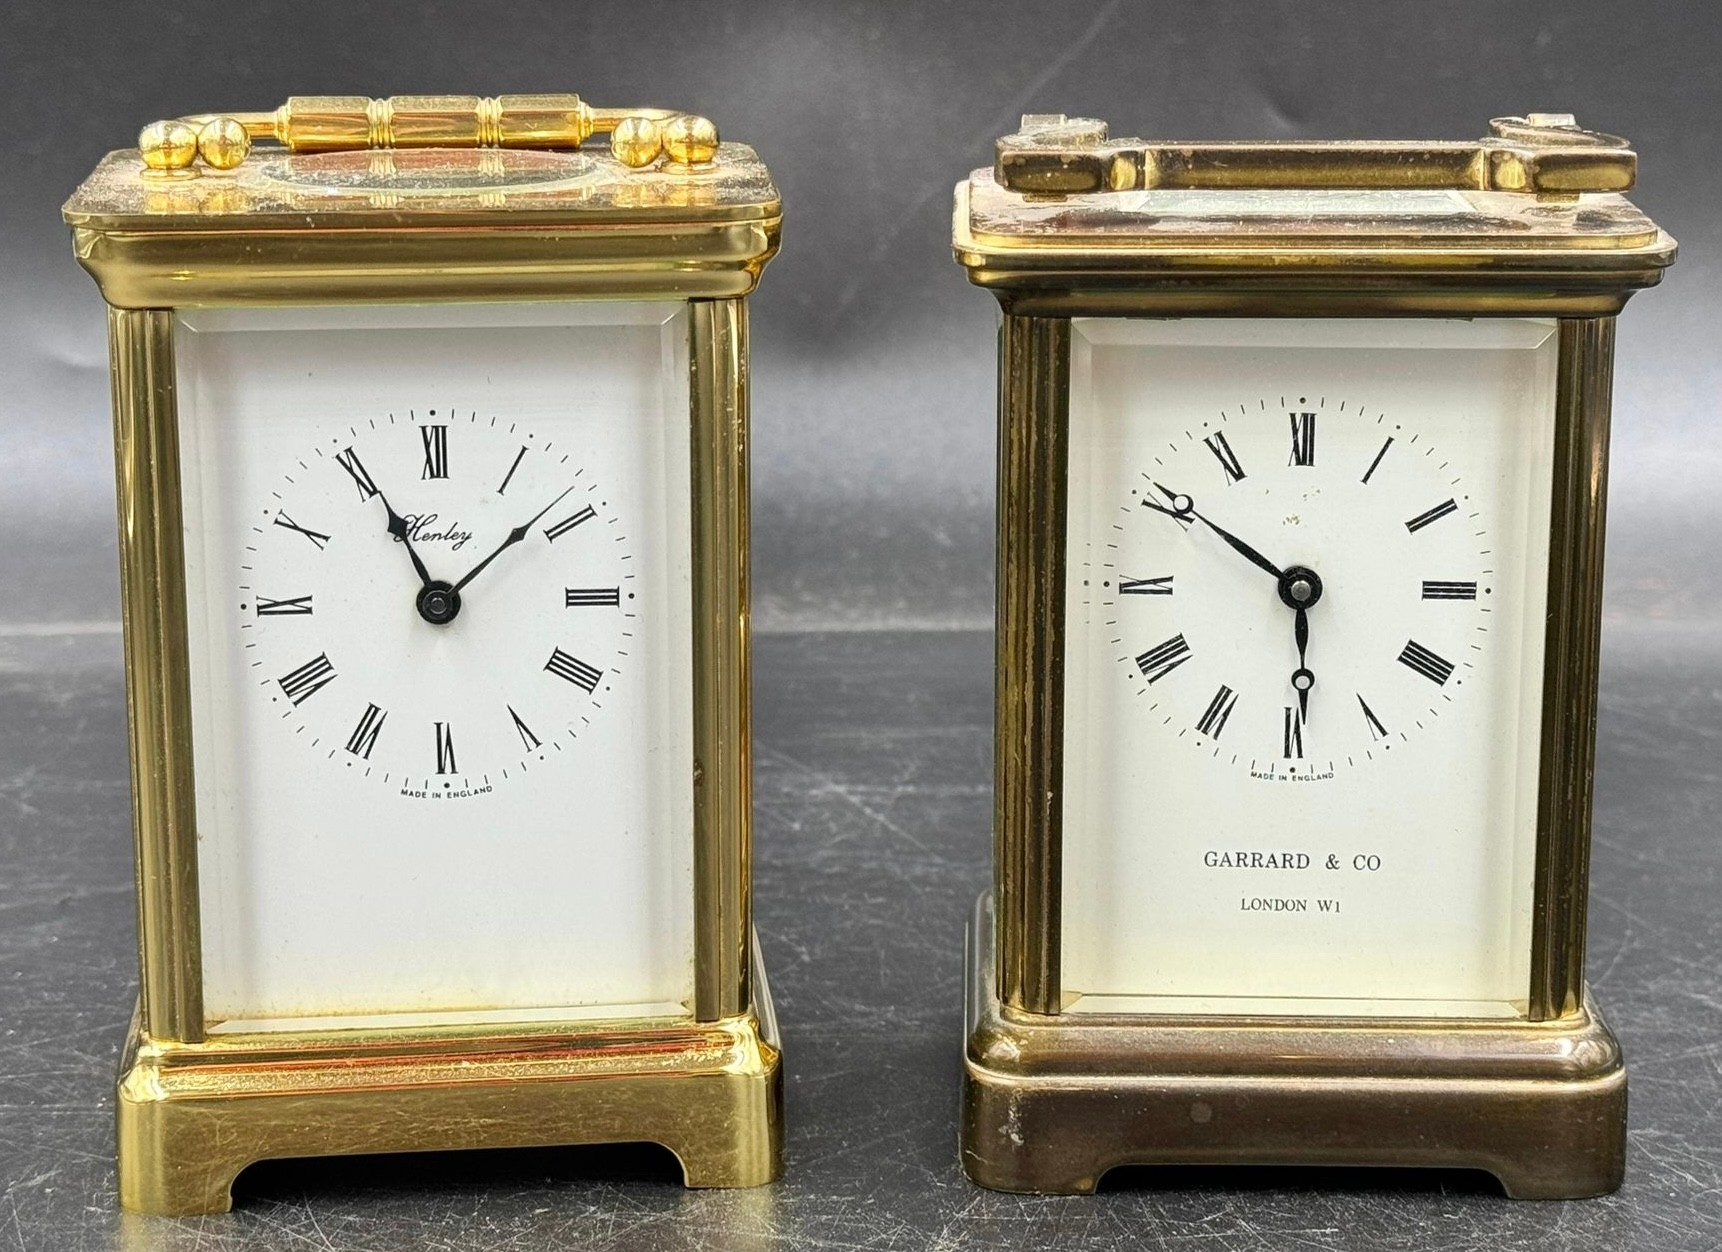 Two brass case carriage clocks to include Garrad & Co London W1 and Henley England marked to back